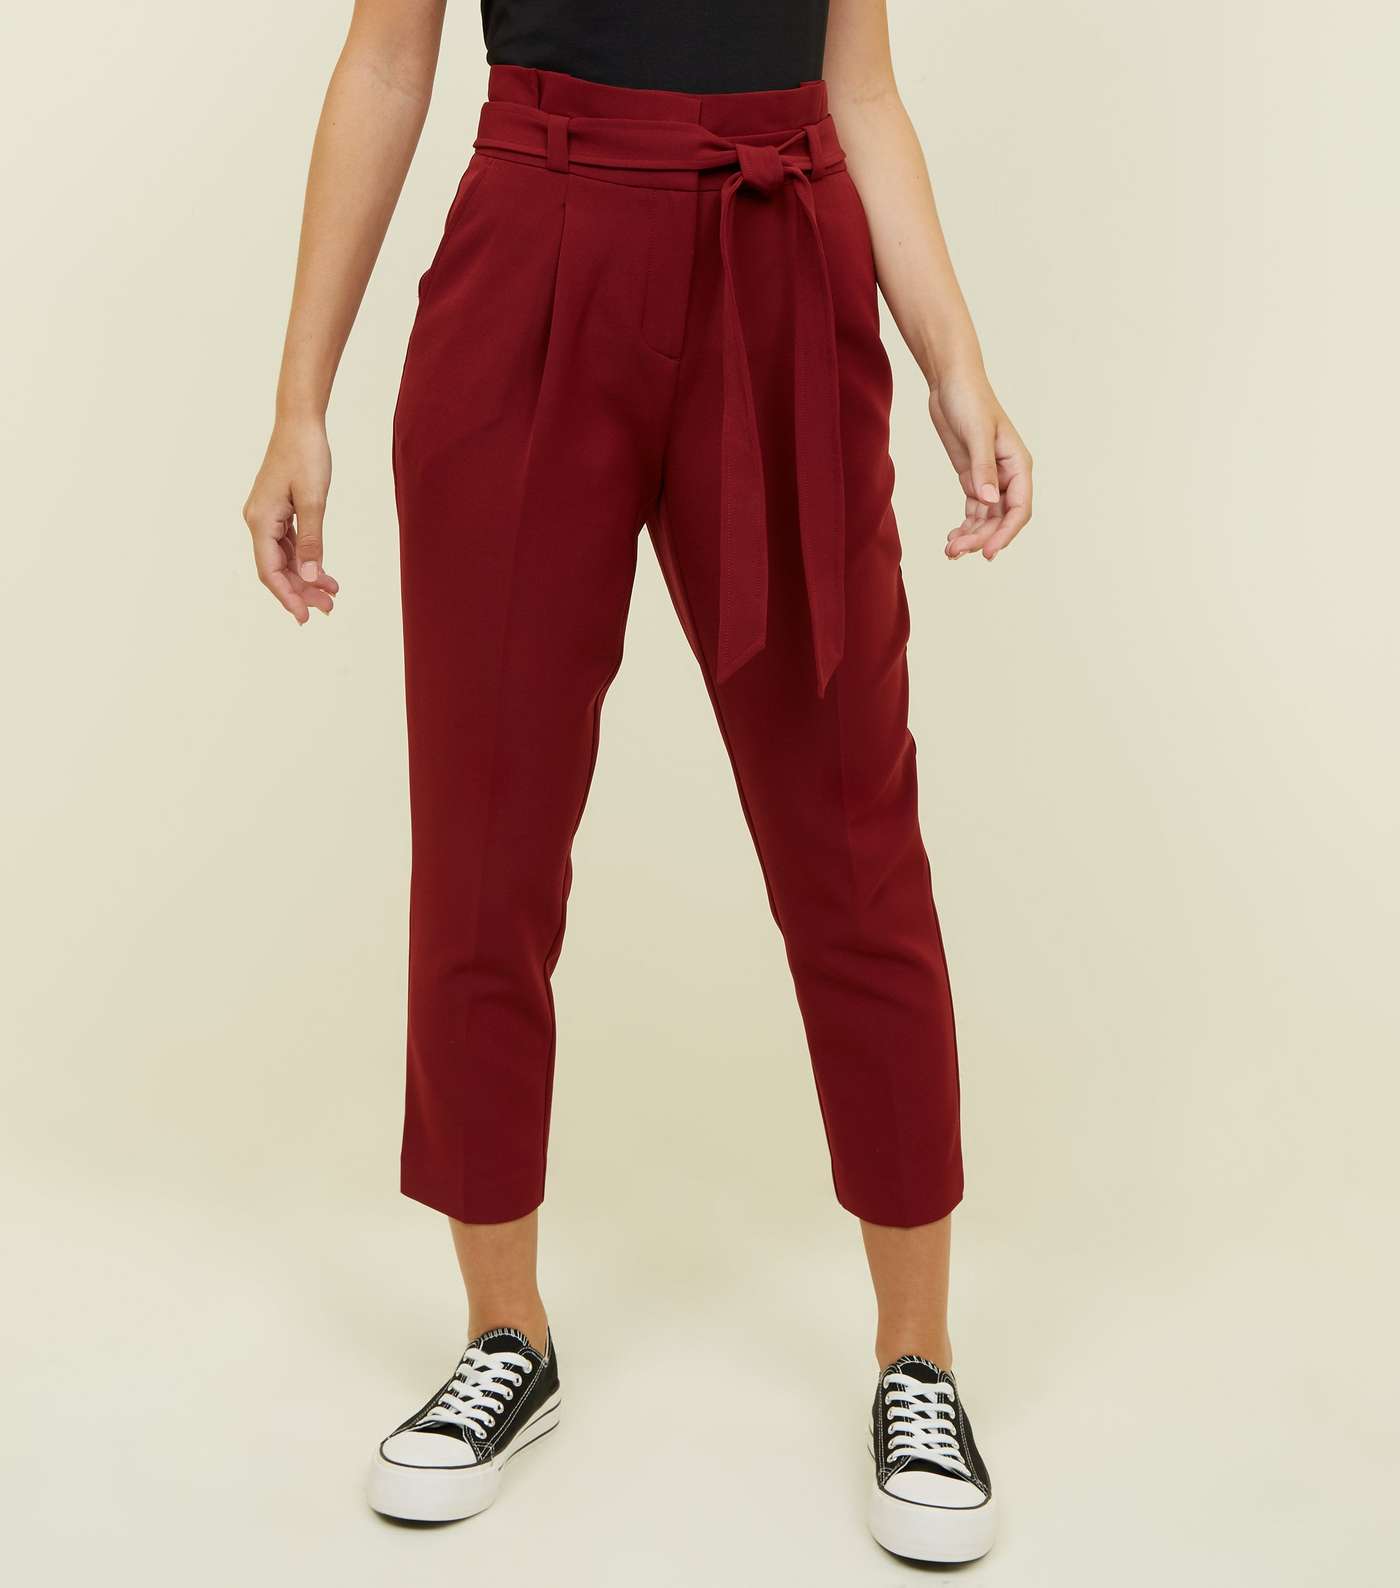 Petite Burgundy Belted Paperbag Waist Trousers Image 2